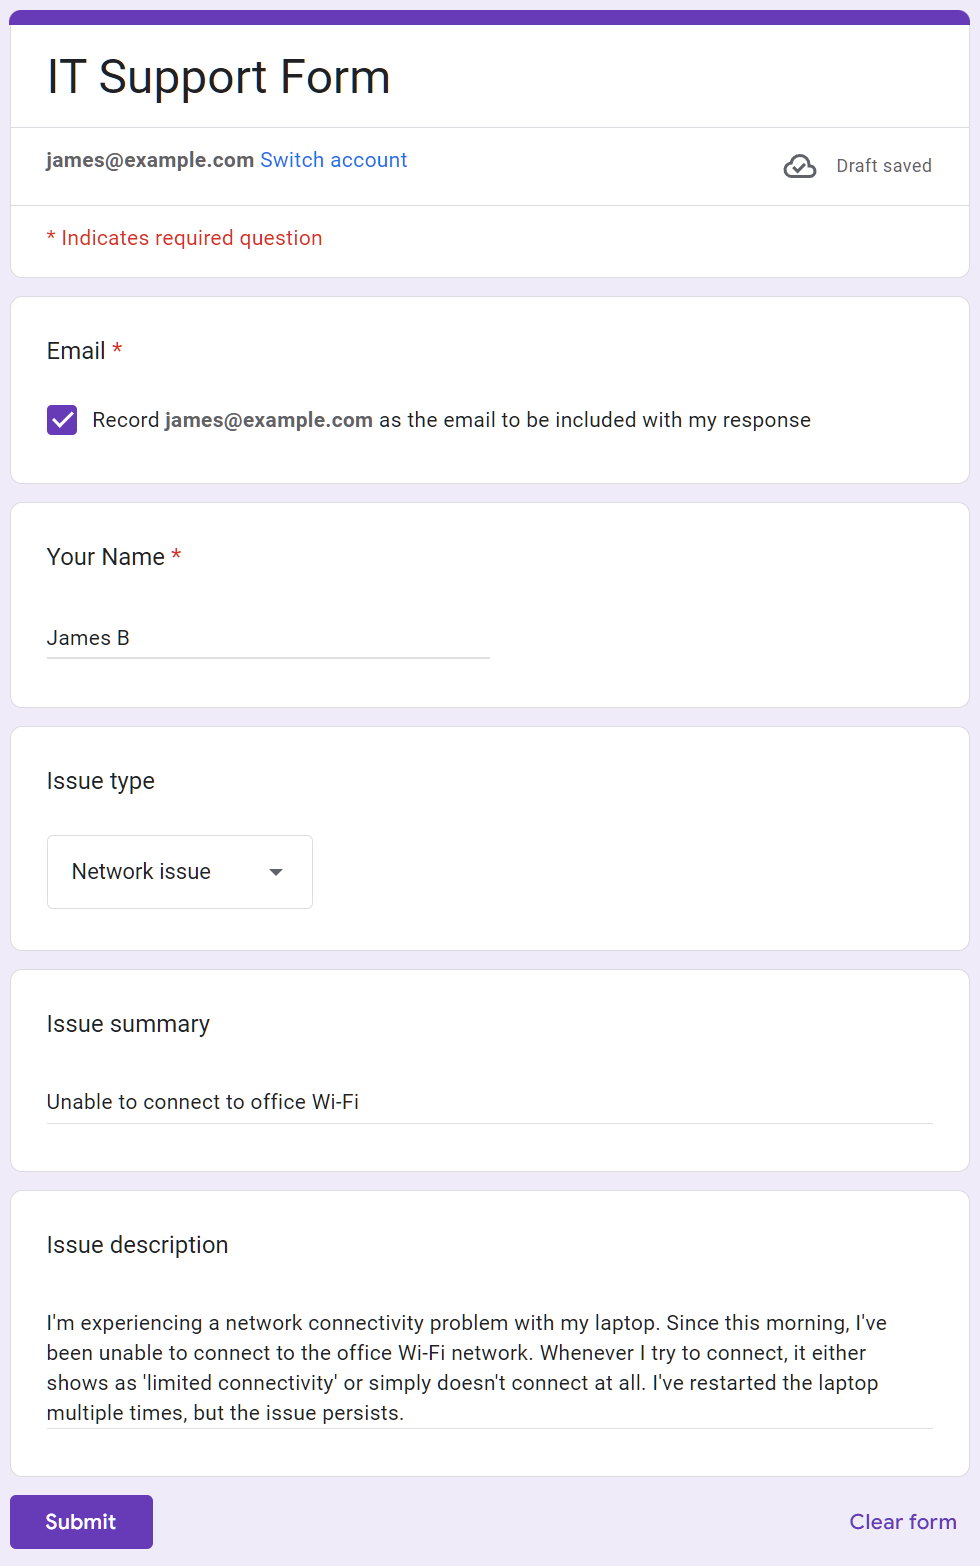 A sample IT Support ticket system based on Google Forms